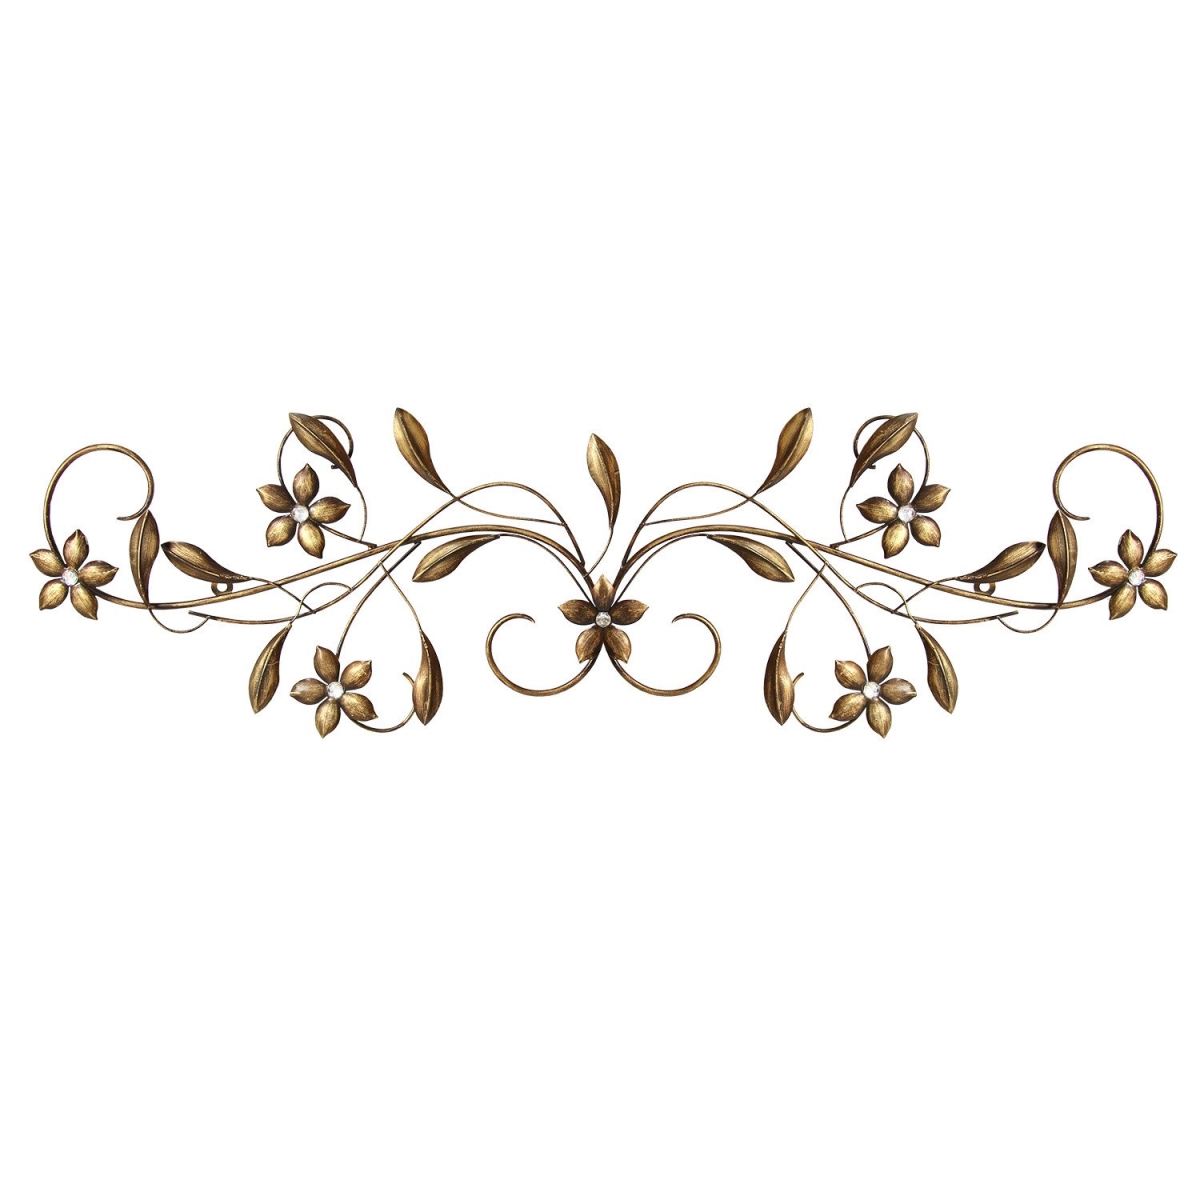 Home Roots 321066 Vintage Scroll Wall Decor, Antique Gold